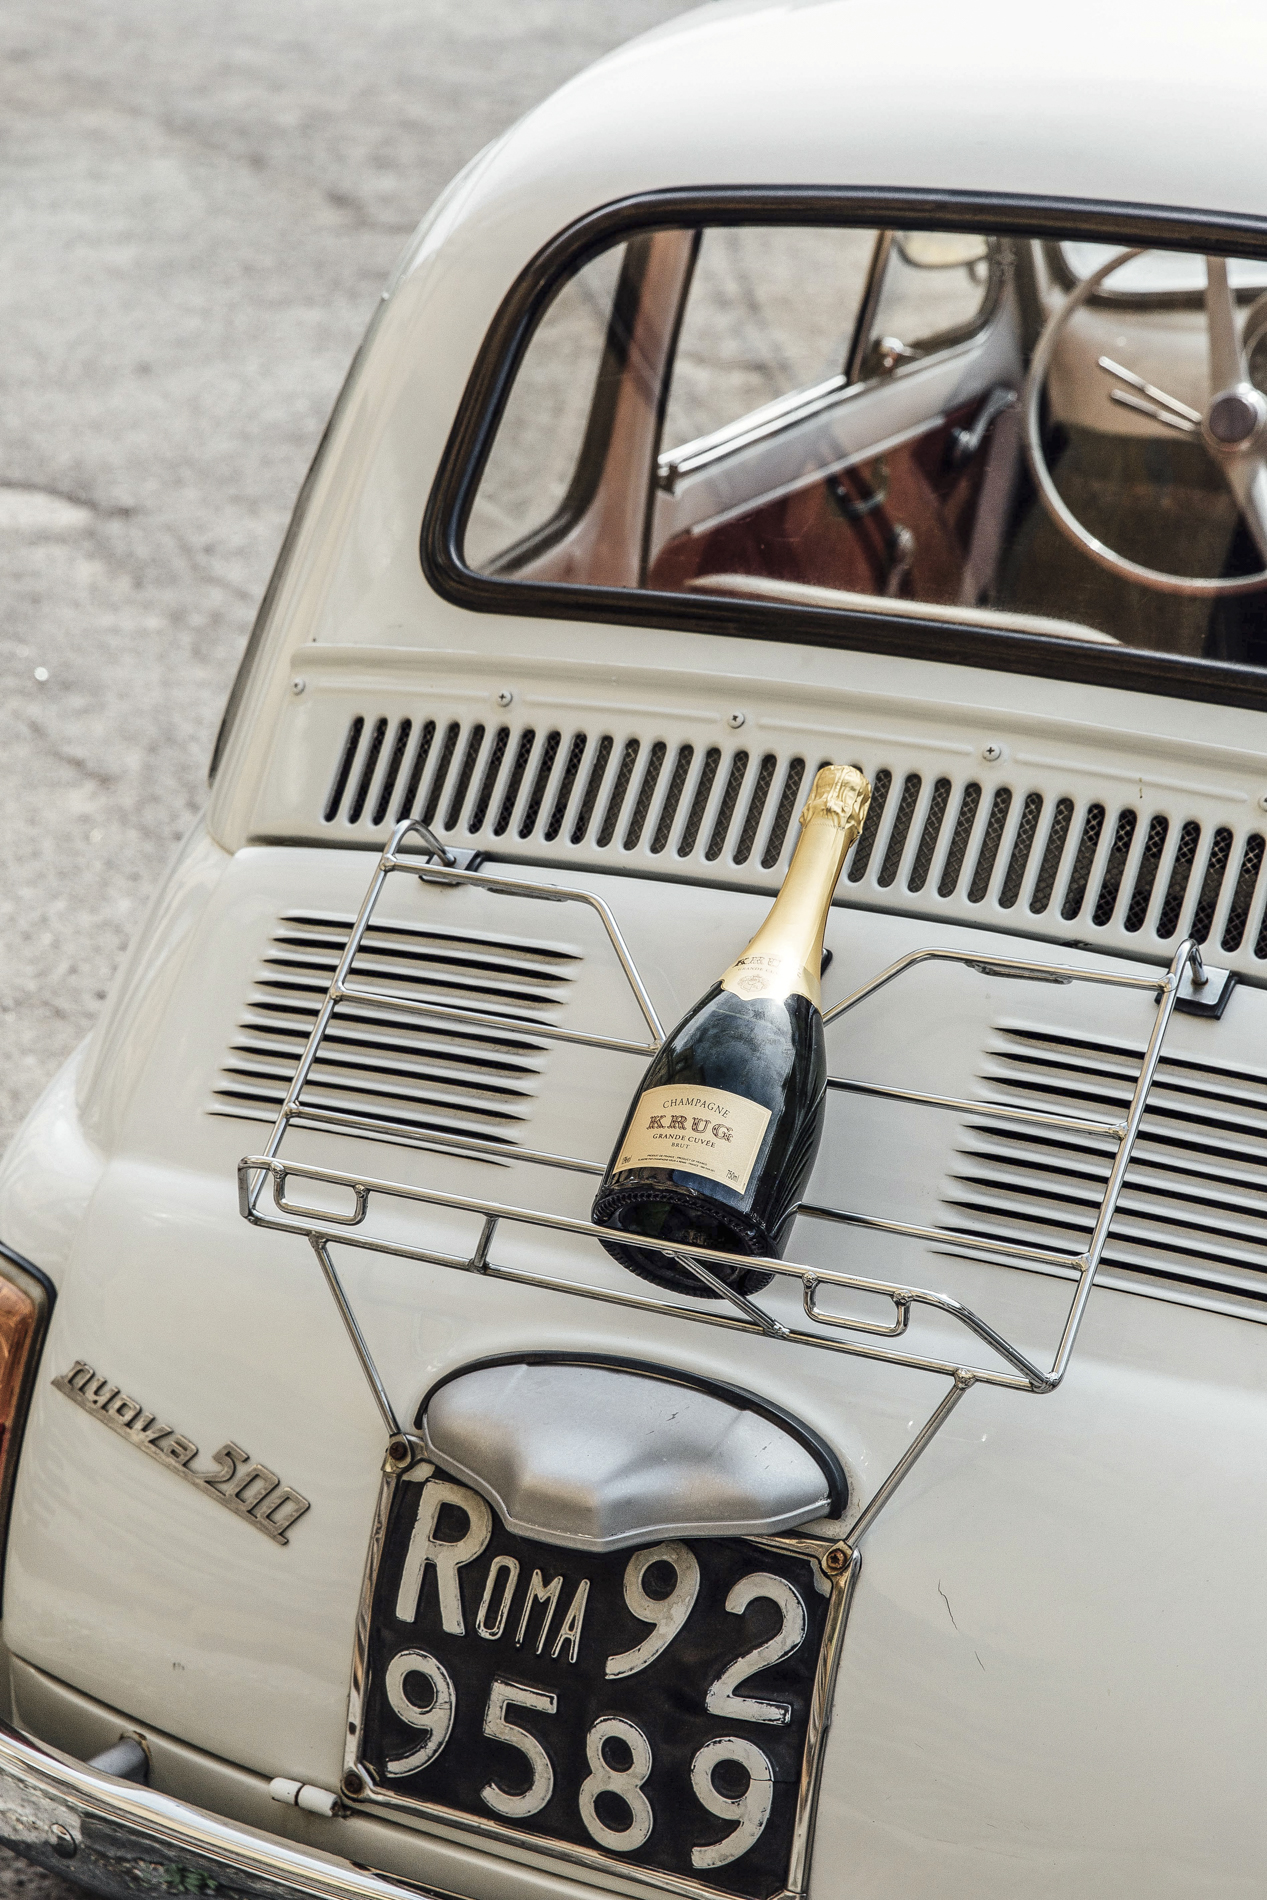 Are Moët and Krug luxury champagnes? - Quora